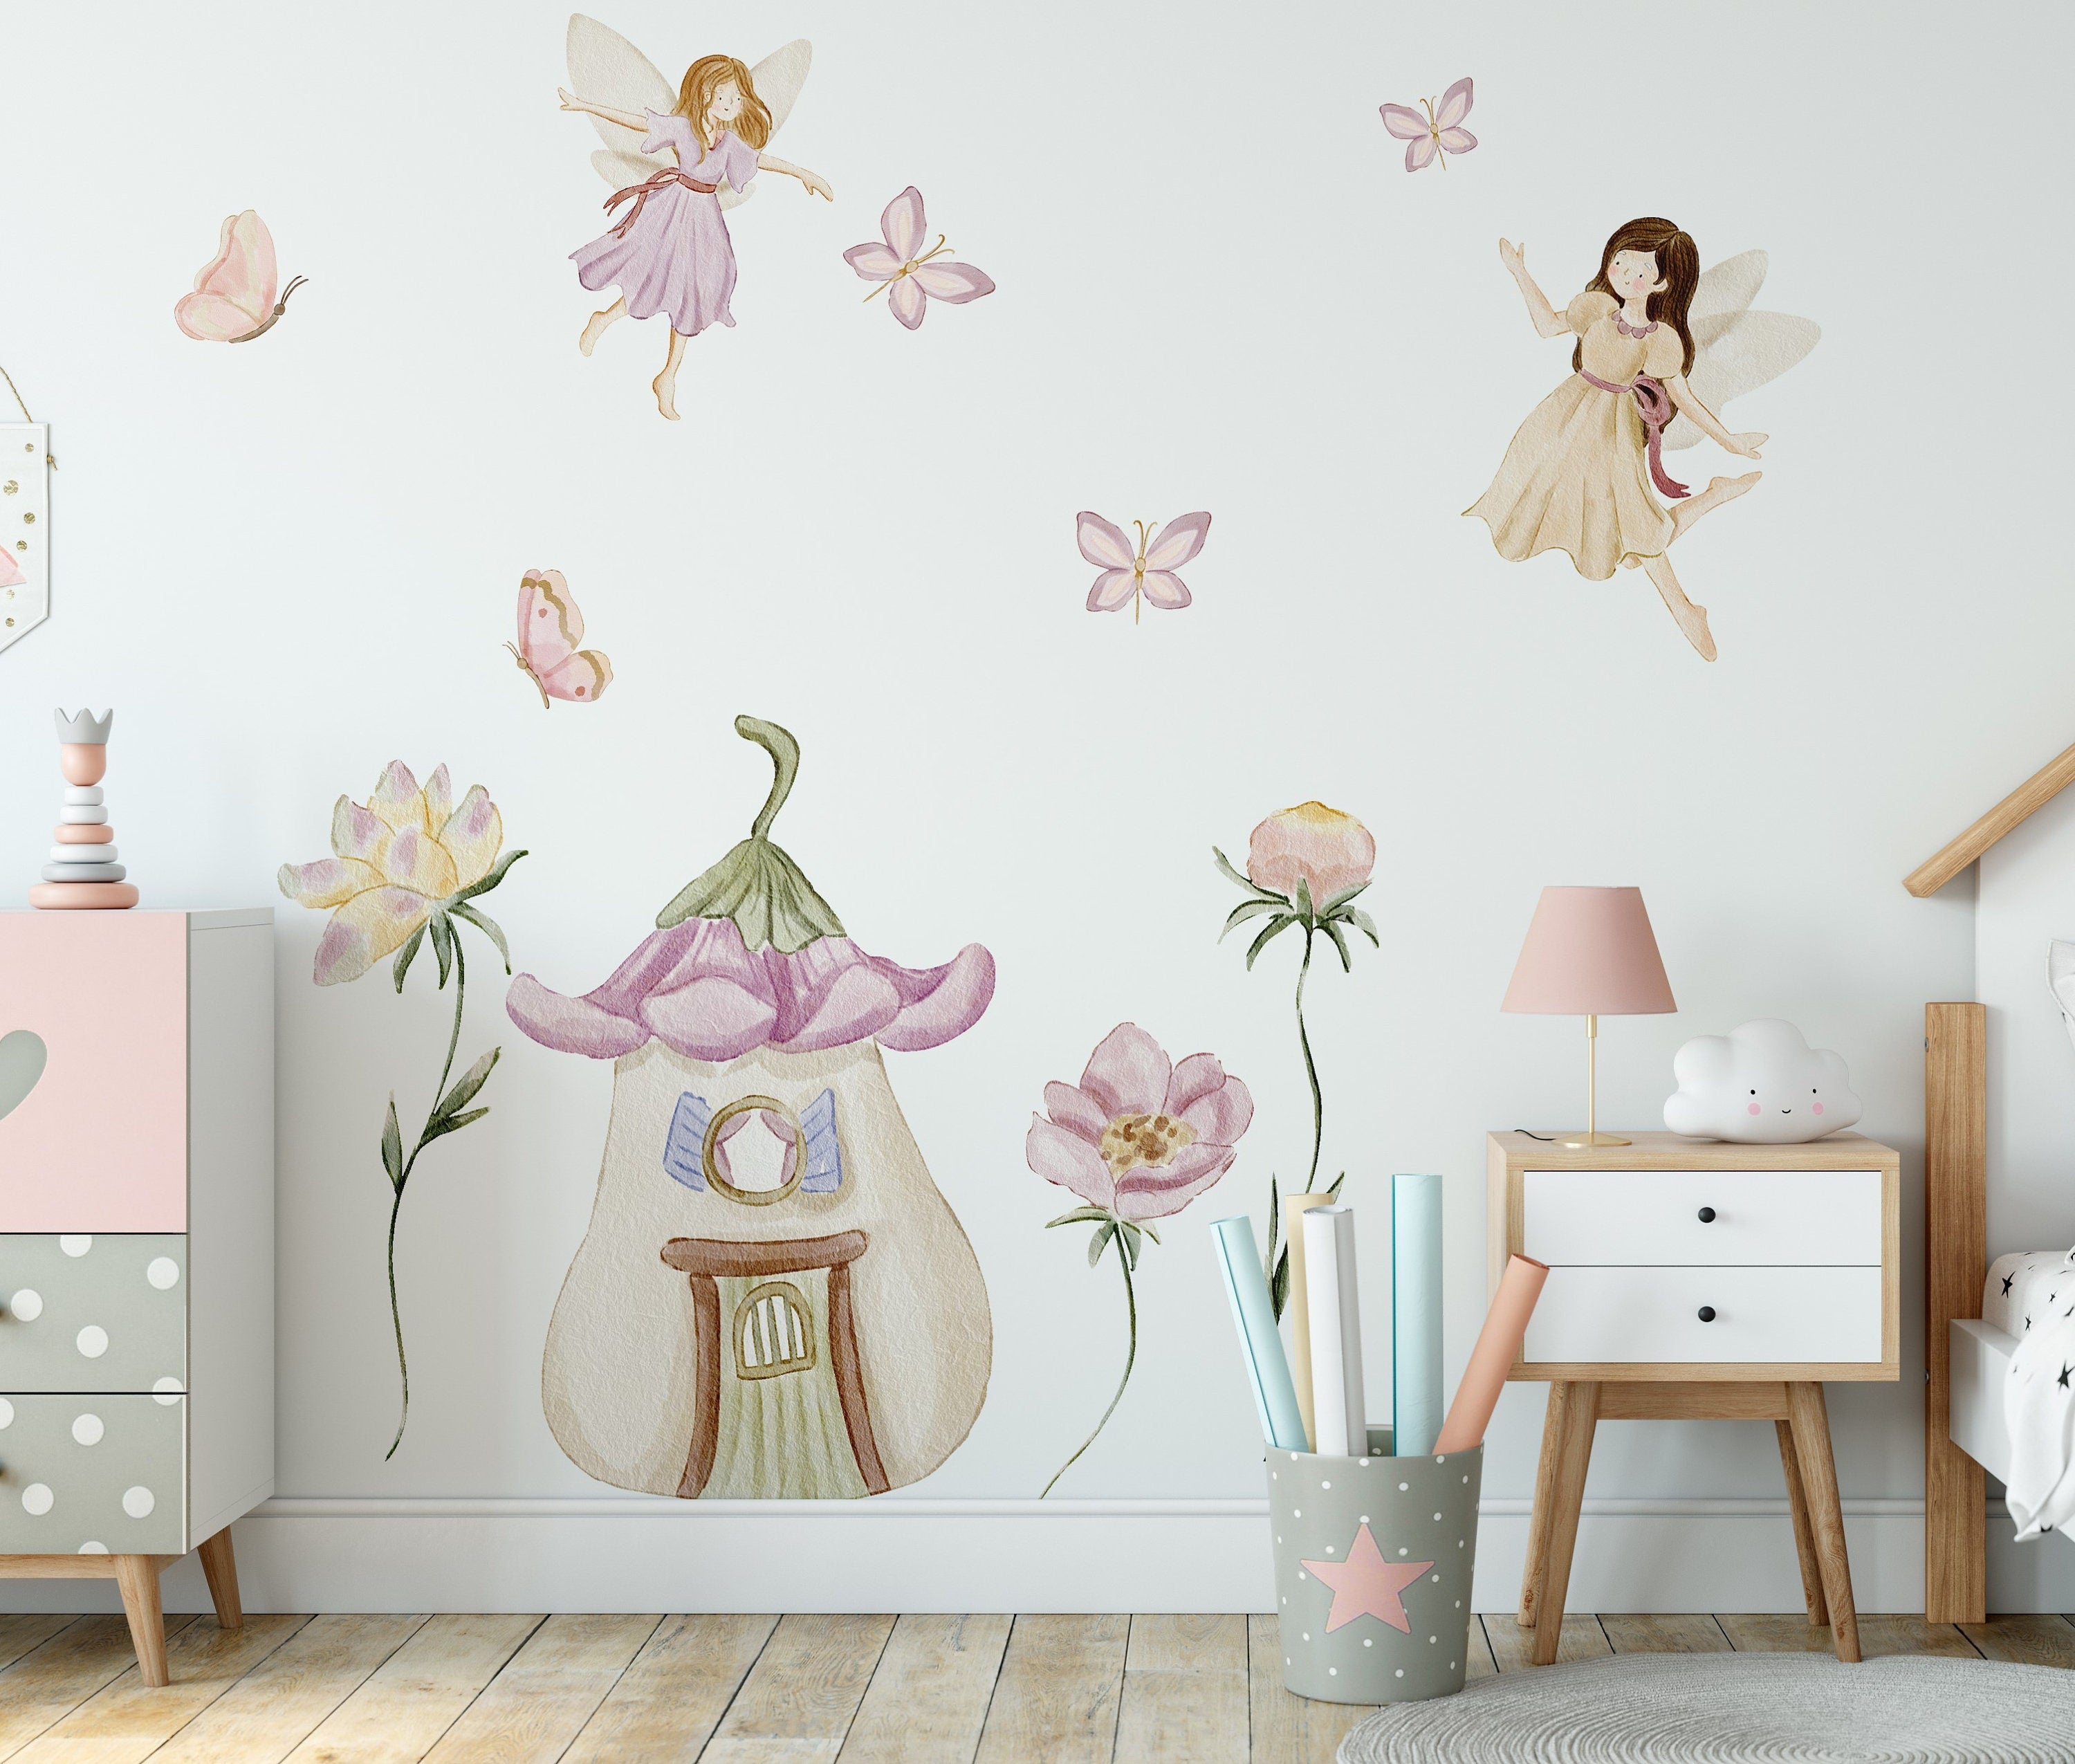 Nursery: Pink Fairies Collection - Removable Wall Adhesive Wall Decal 3 Wall Decals 26W x 30H